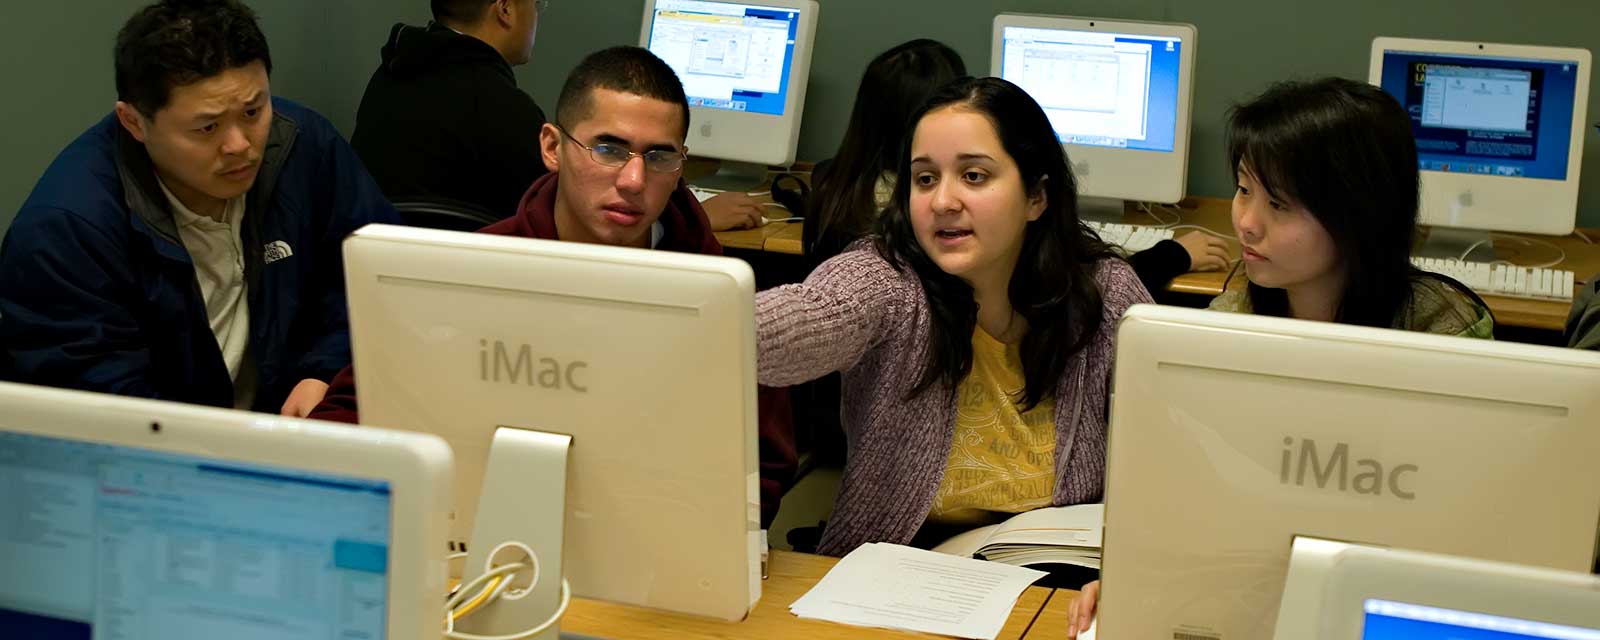 Male and female students discussion in computer lab